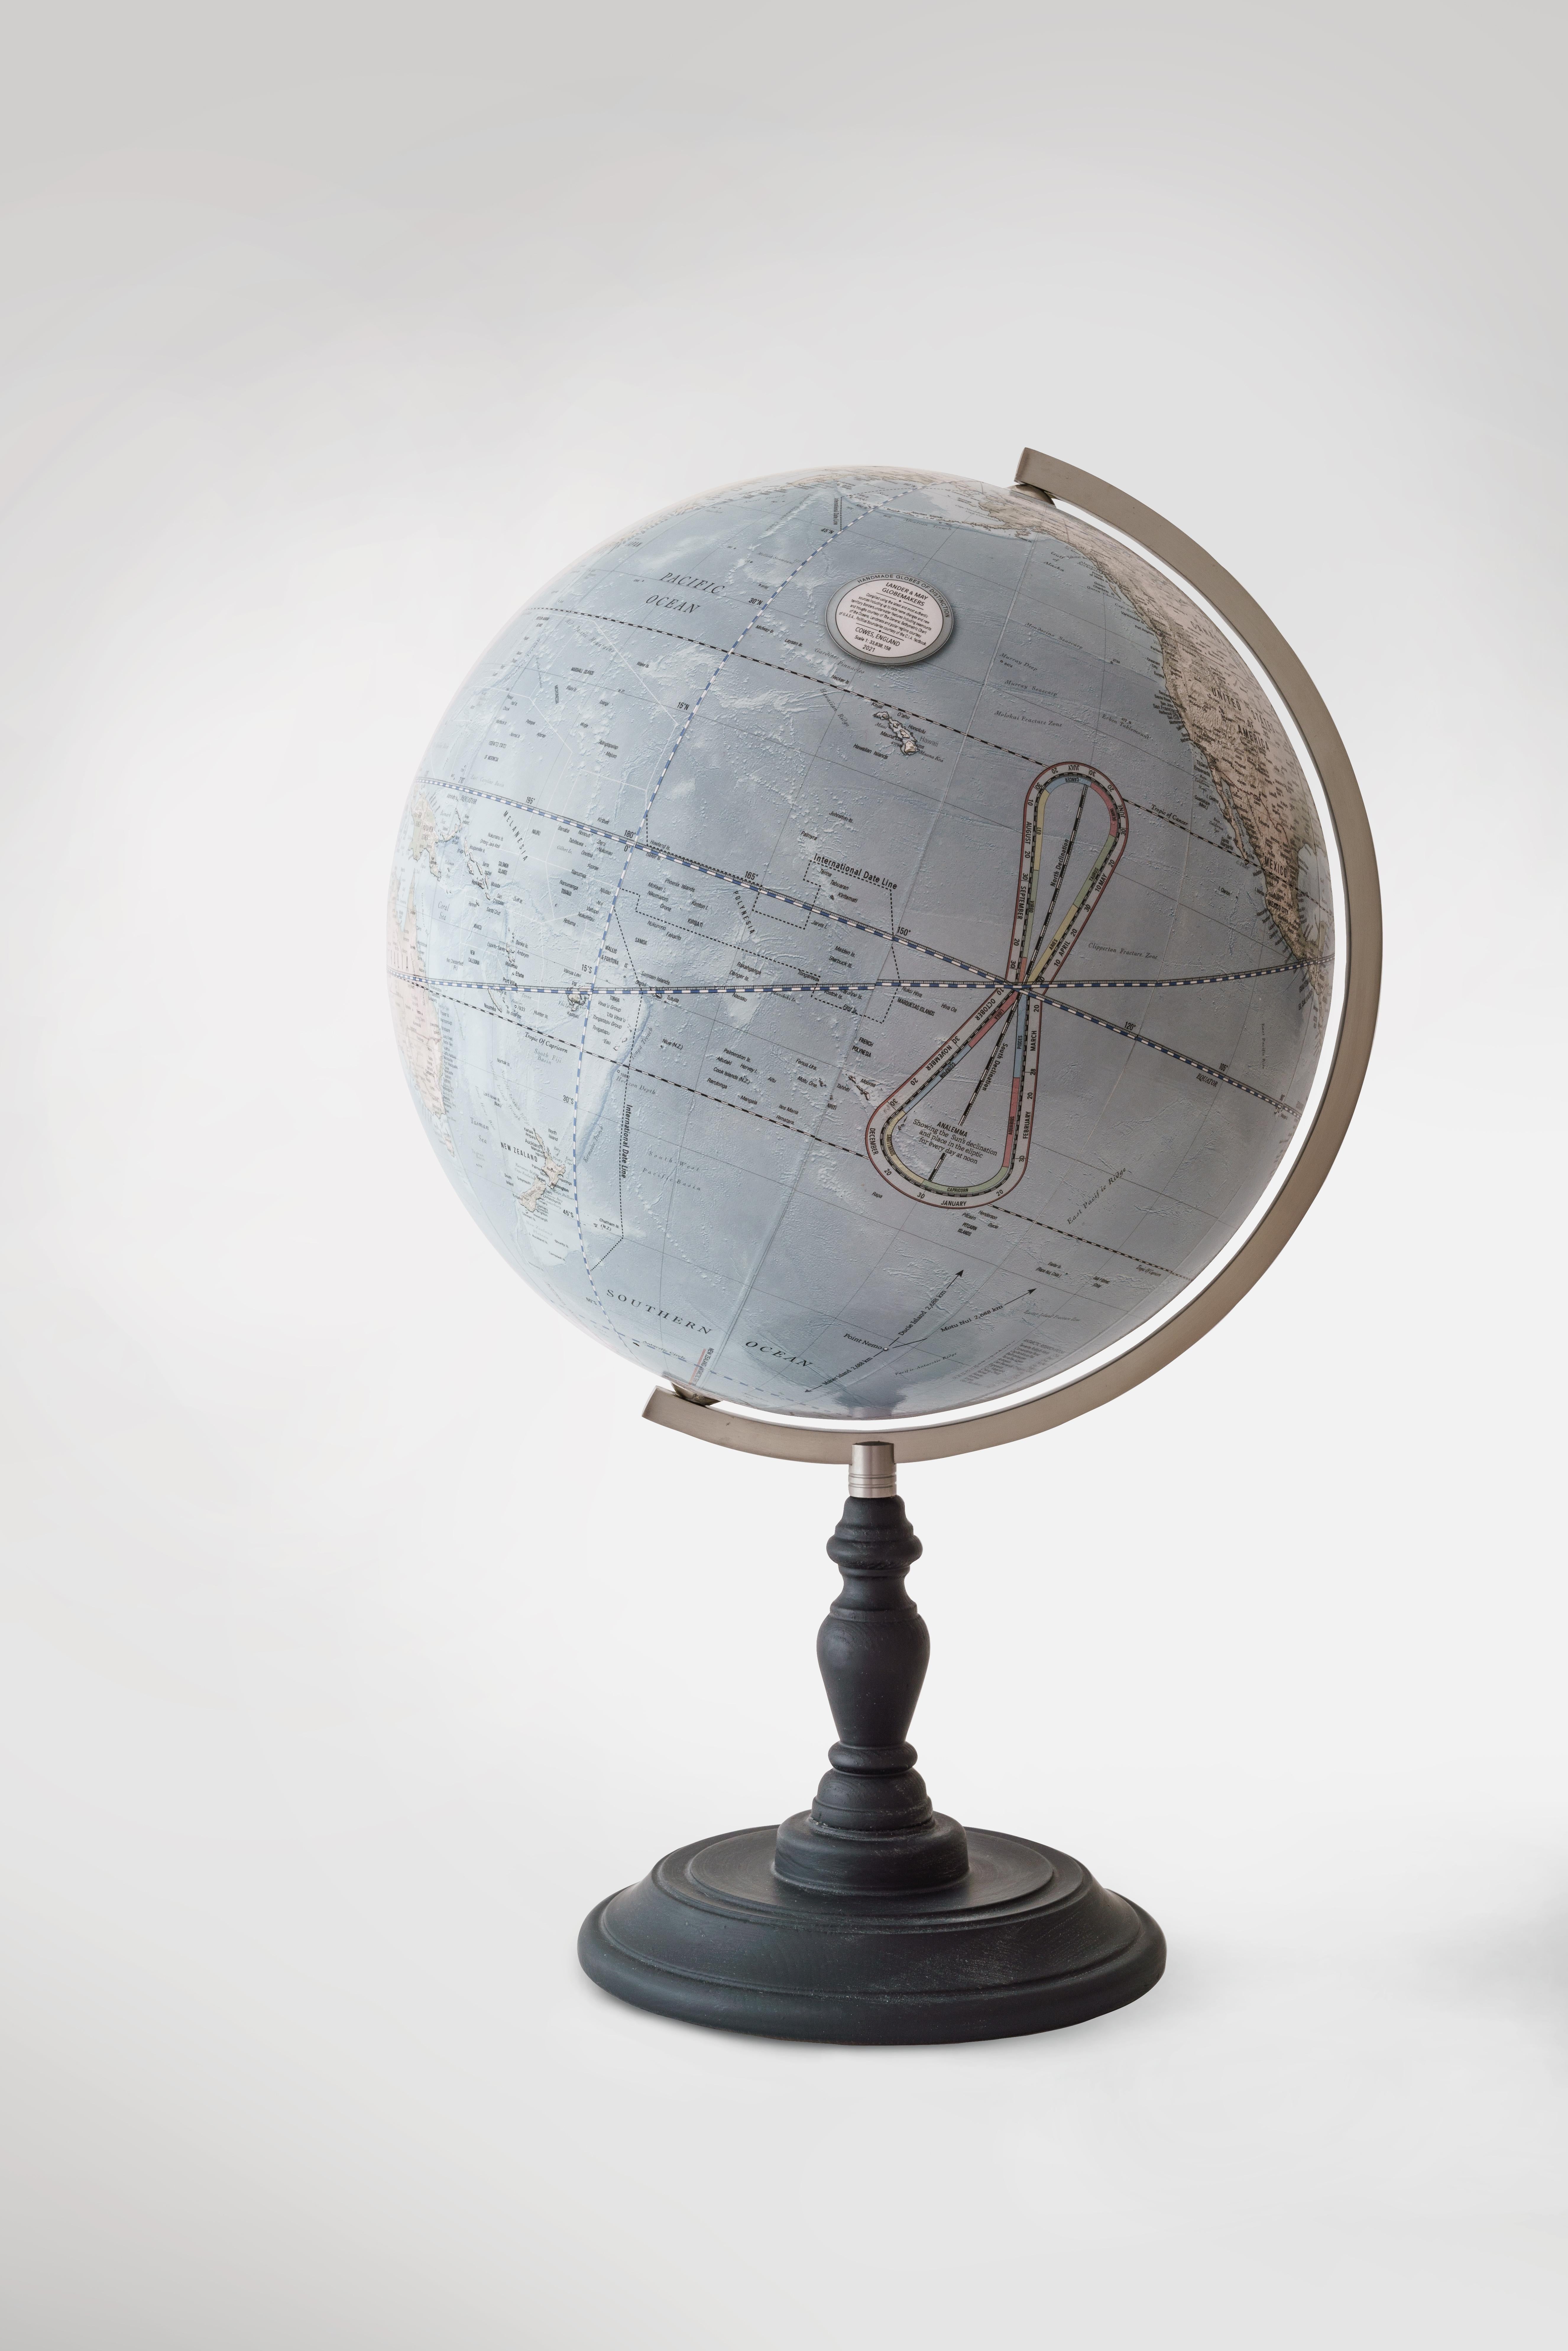 This 15 inch diameter globe shares the same cartographic detail as the vintage version but is presented in a bright contemporary style.
The cartography is constantly updated and features 2780 cities and towns, 730 islands, 610 seas/rivers/lakes and